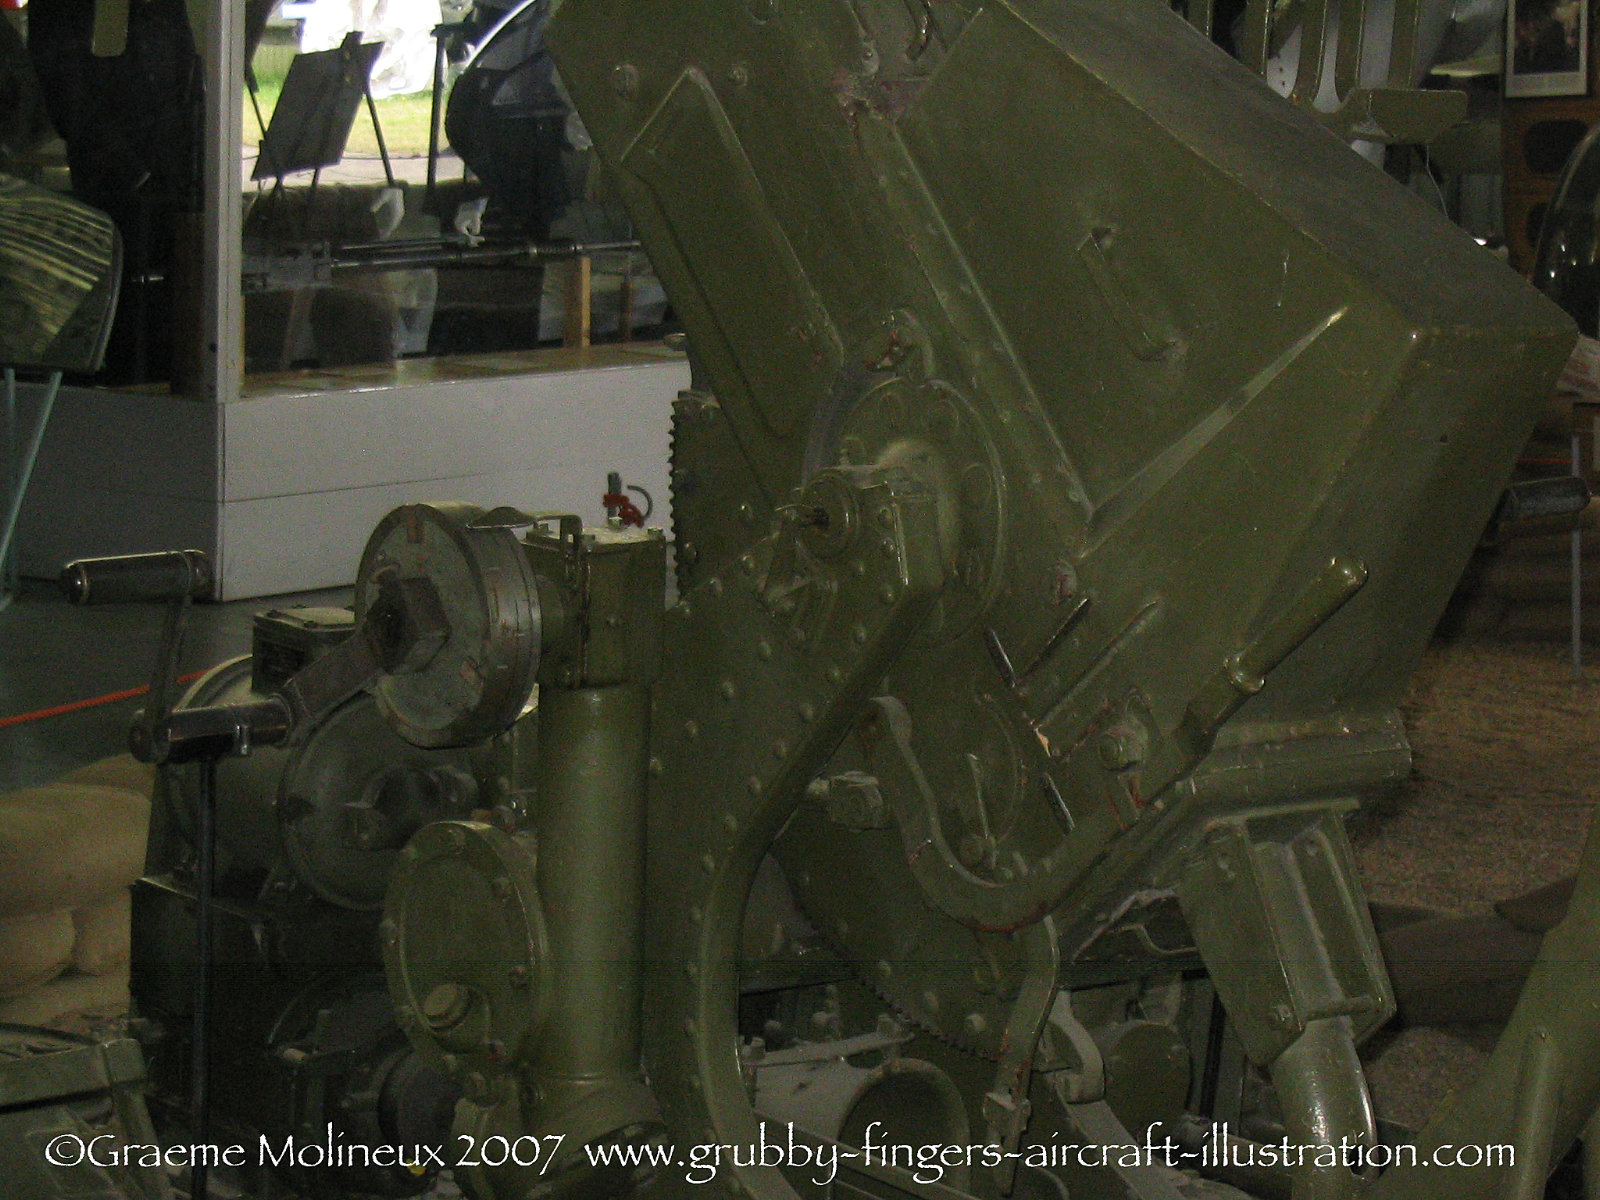 Bofors%2040mm%20AAA%20Cannon%20ANAM%202006%2008%20Graeme%20Molineux